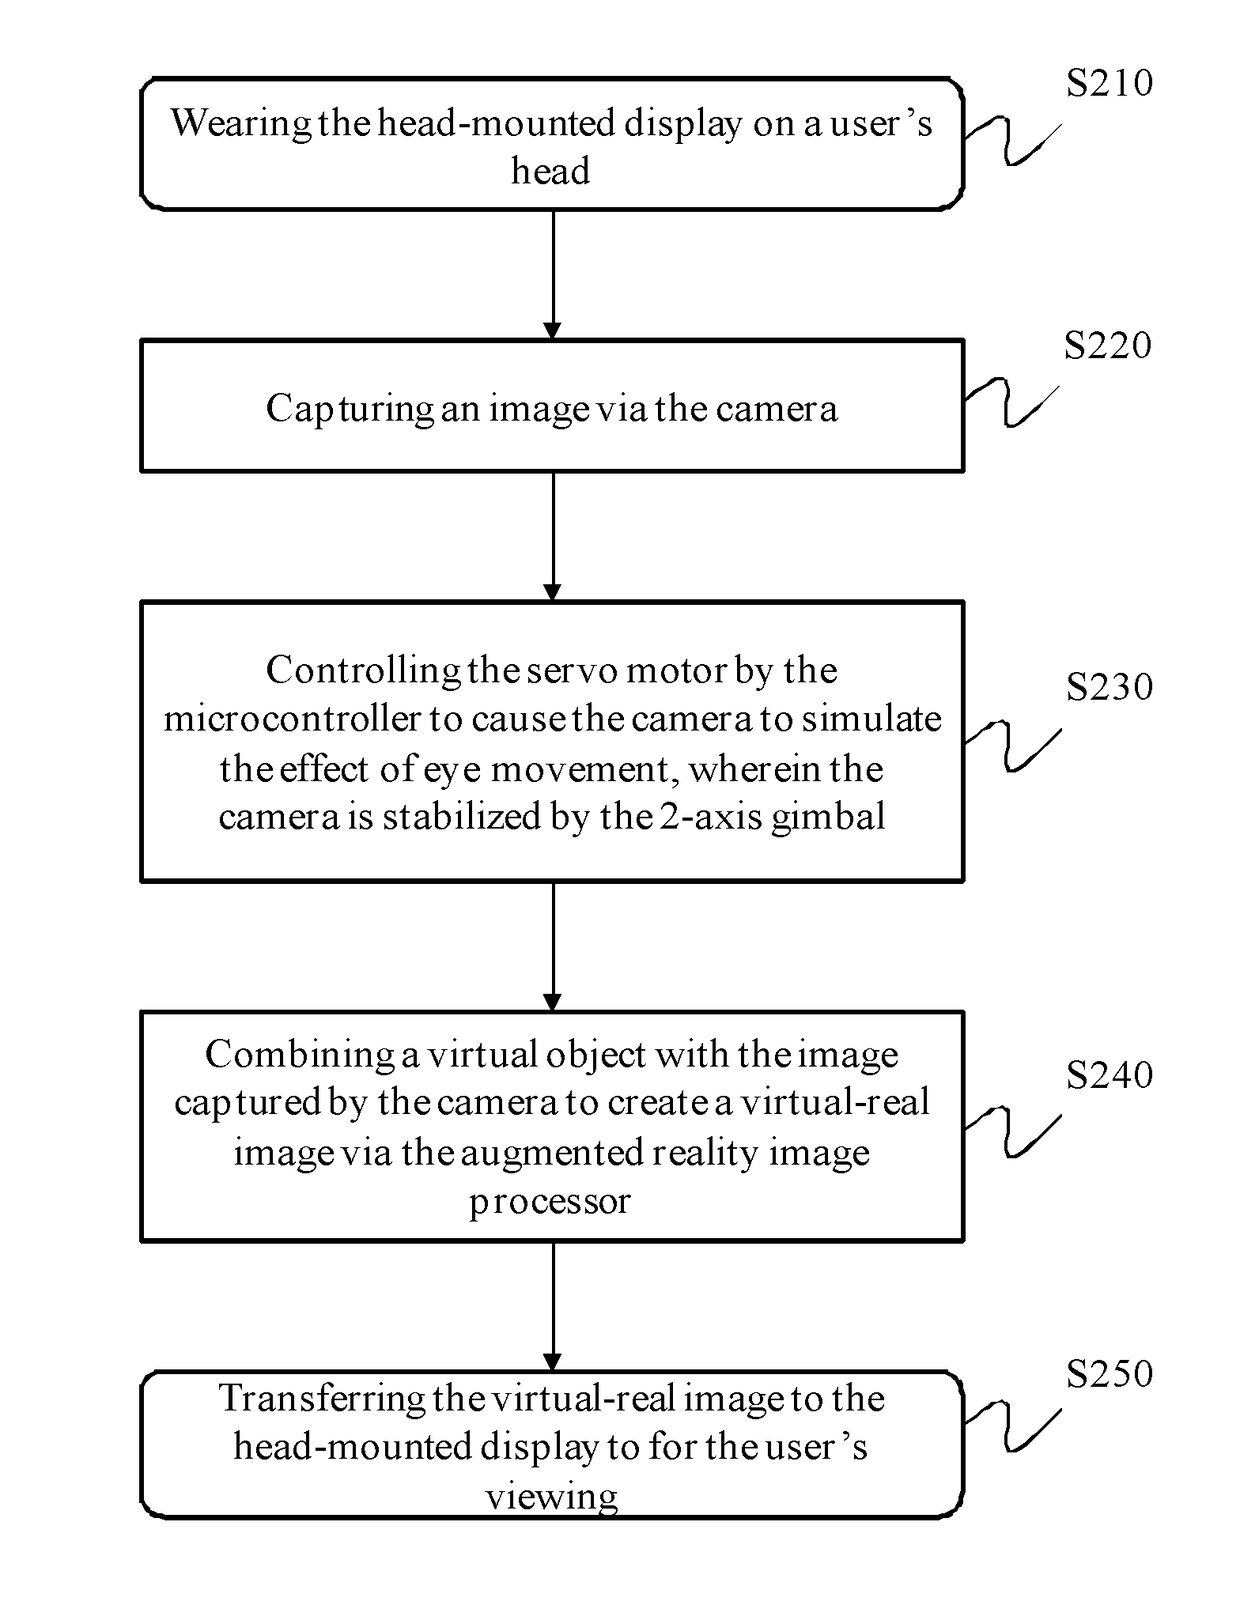 Stereoscopic video see-through augmented reality device with vergence control and gaze stabilization, head-mounted display and method for near-field augmented reality application